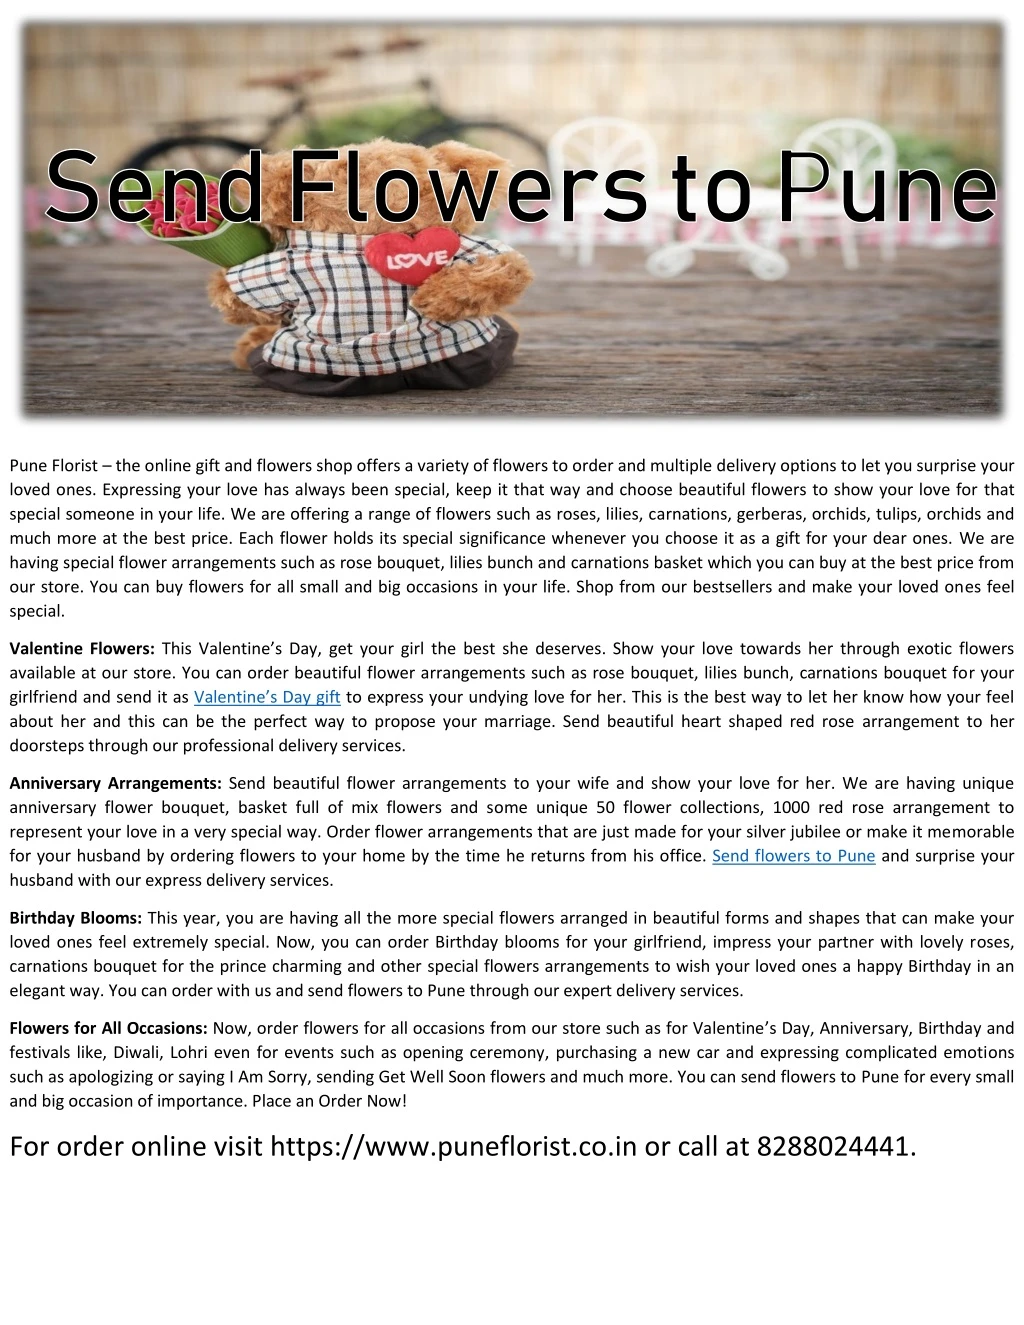 pune florist the online gift and flowers shop